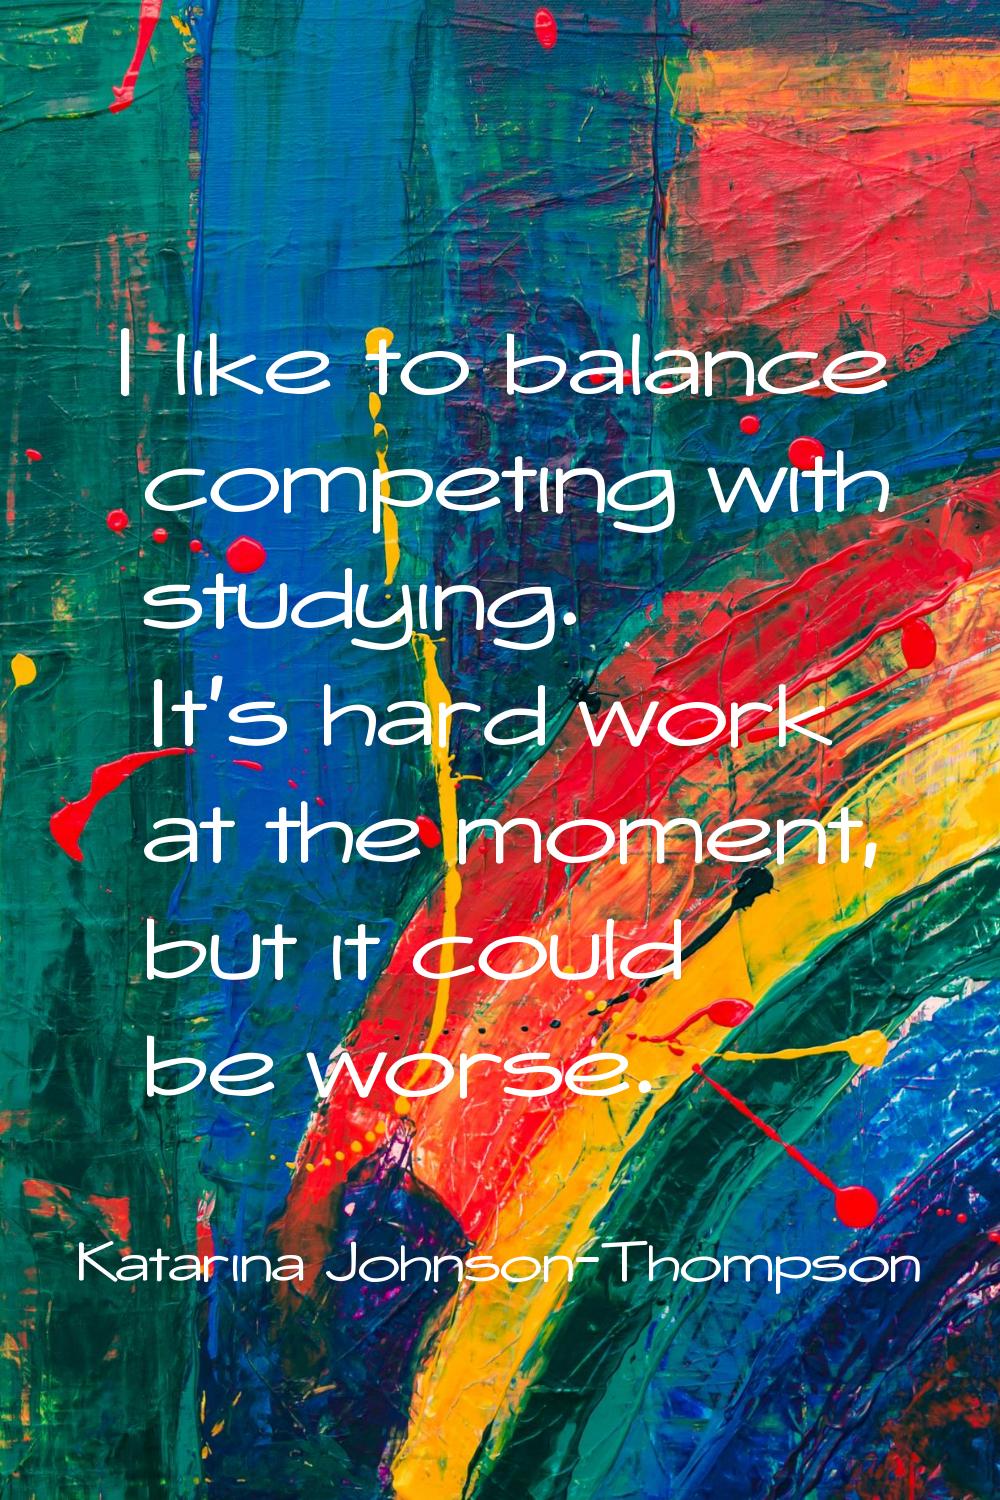 I like to balance competing with studying. It's hard work at the moment, but it could be worse.